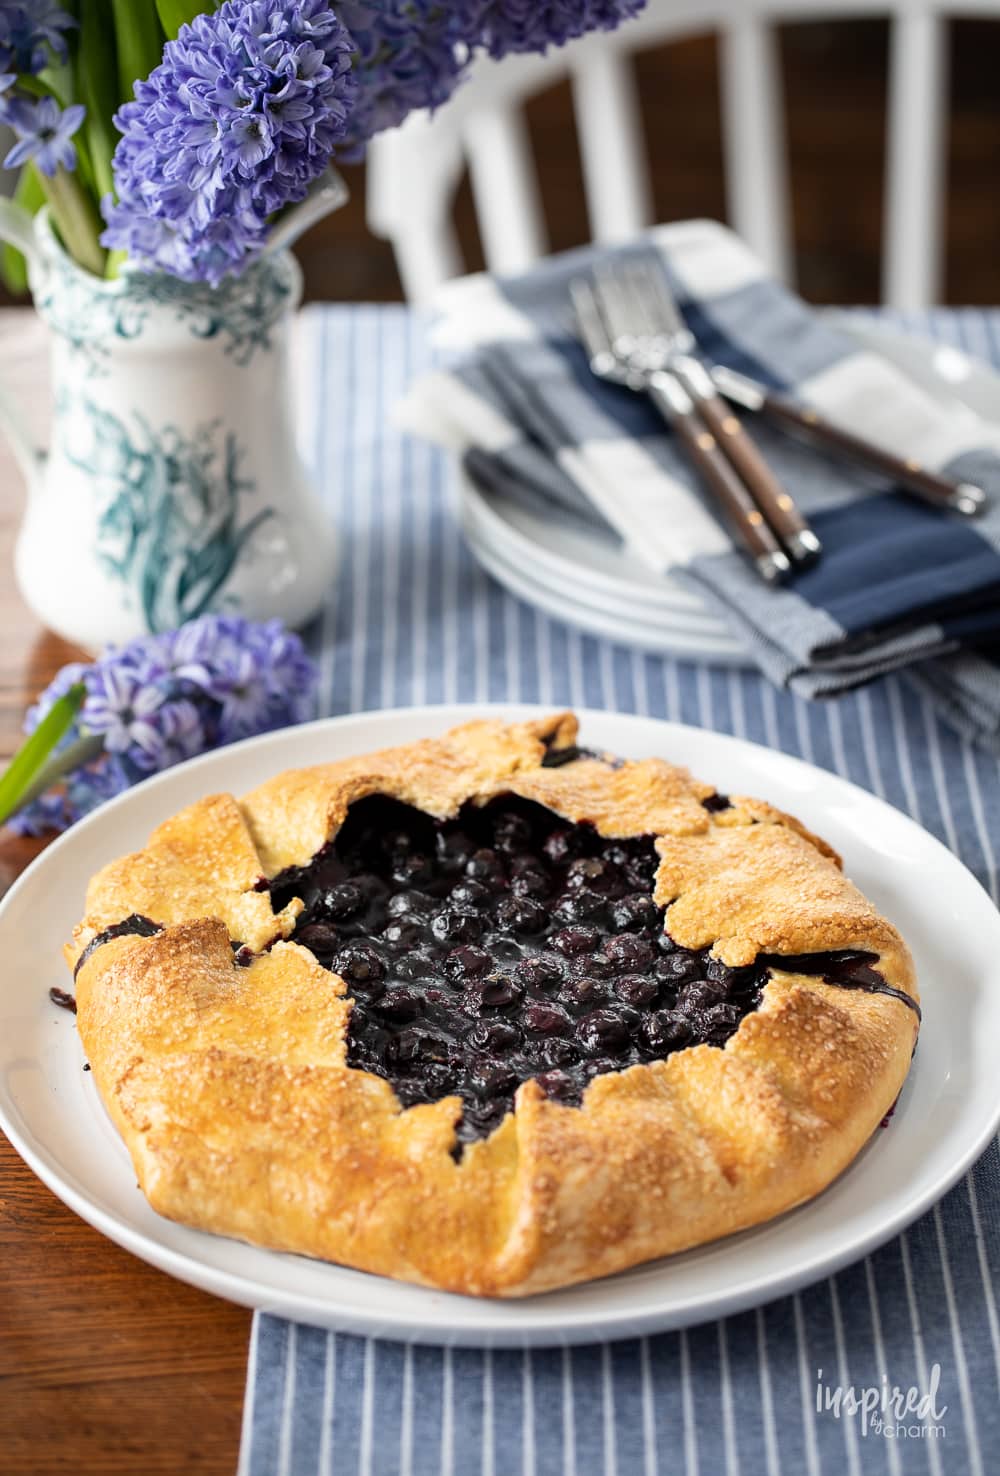 whole blueberry galette on platter on table.